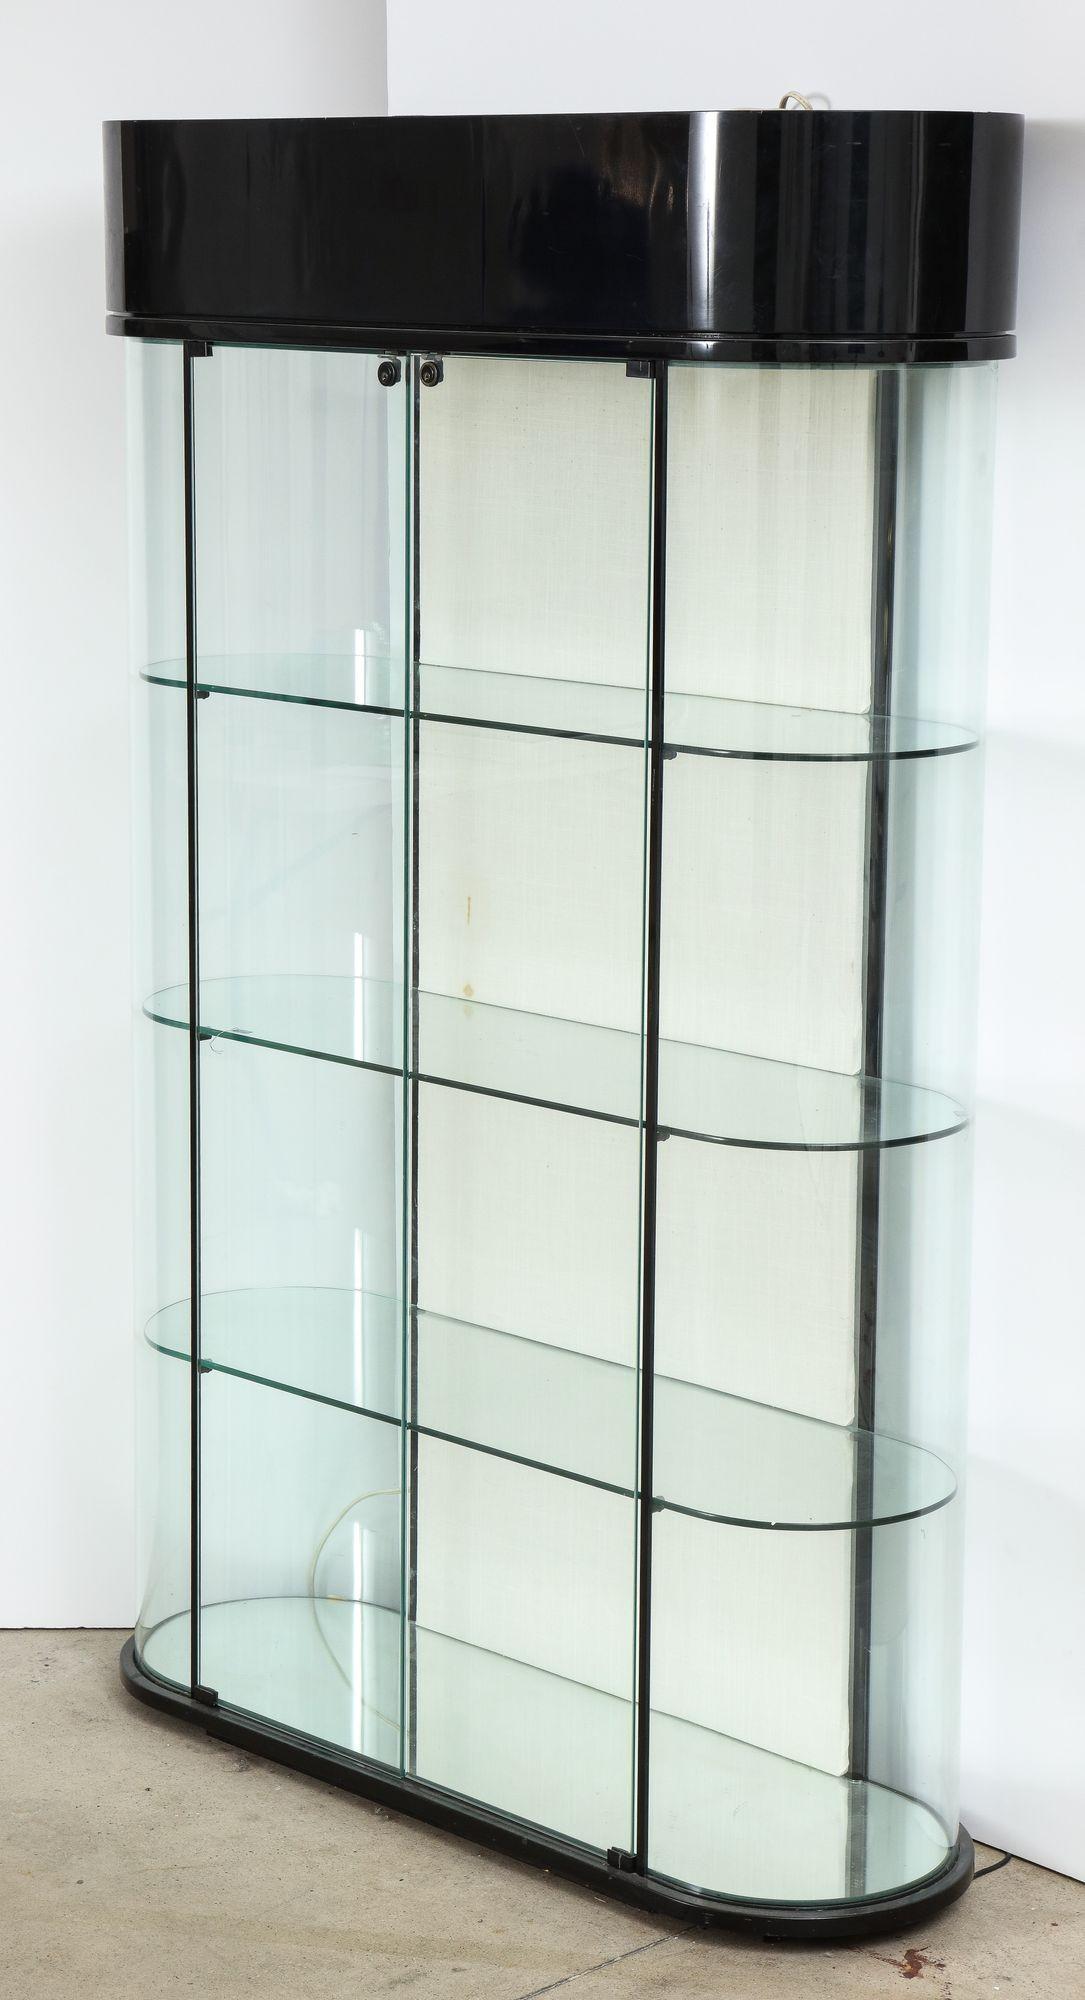 A useful and stylish modernist display cabinet by Pace with top interior spot lights and three glass shelves within a black lacquered curved frame and flanked by contoured glass panels either side of a pair of locking center doors.
Light surface